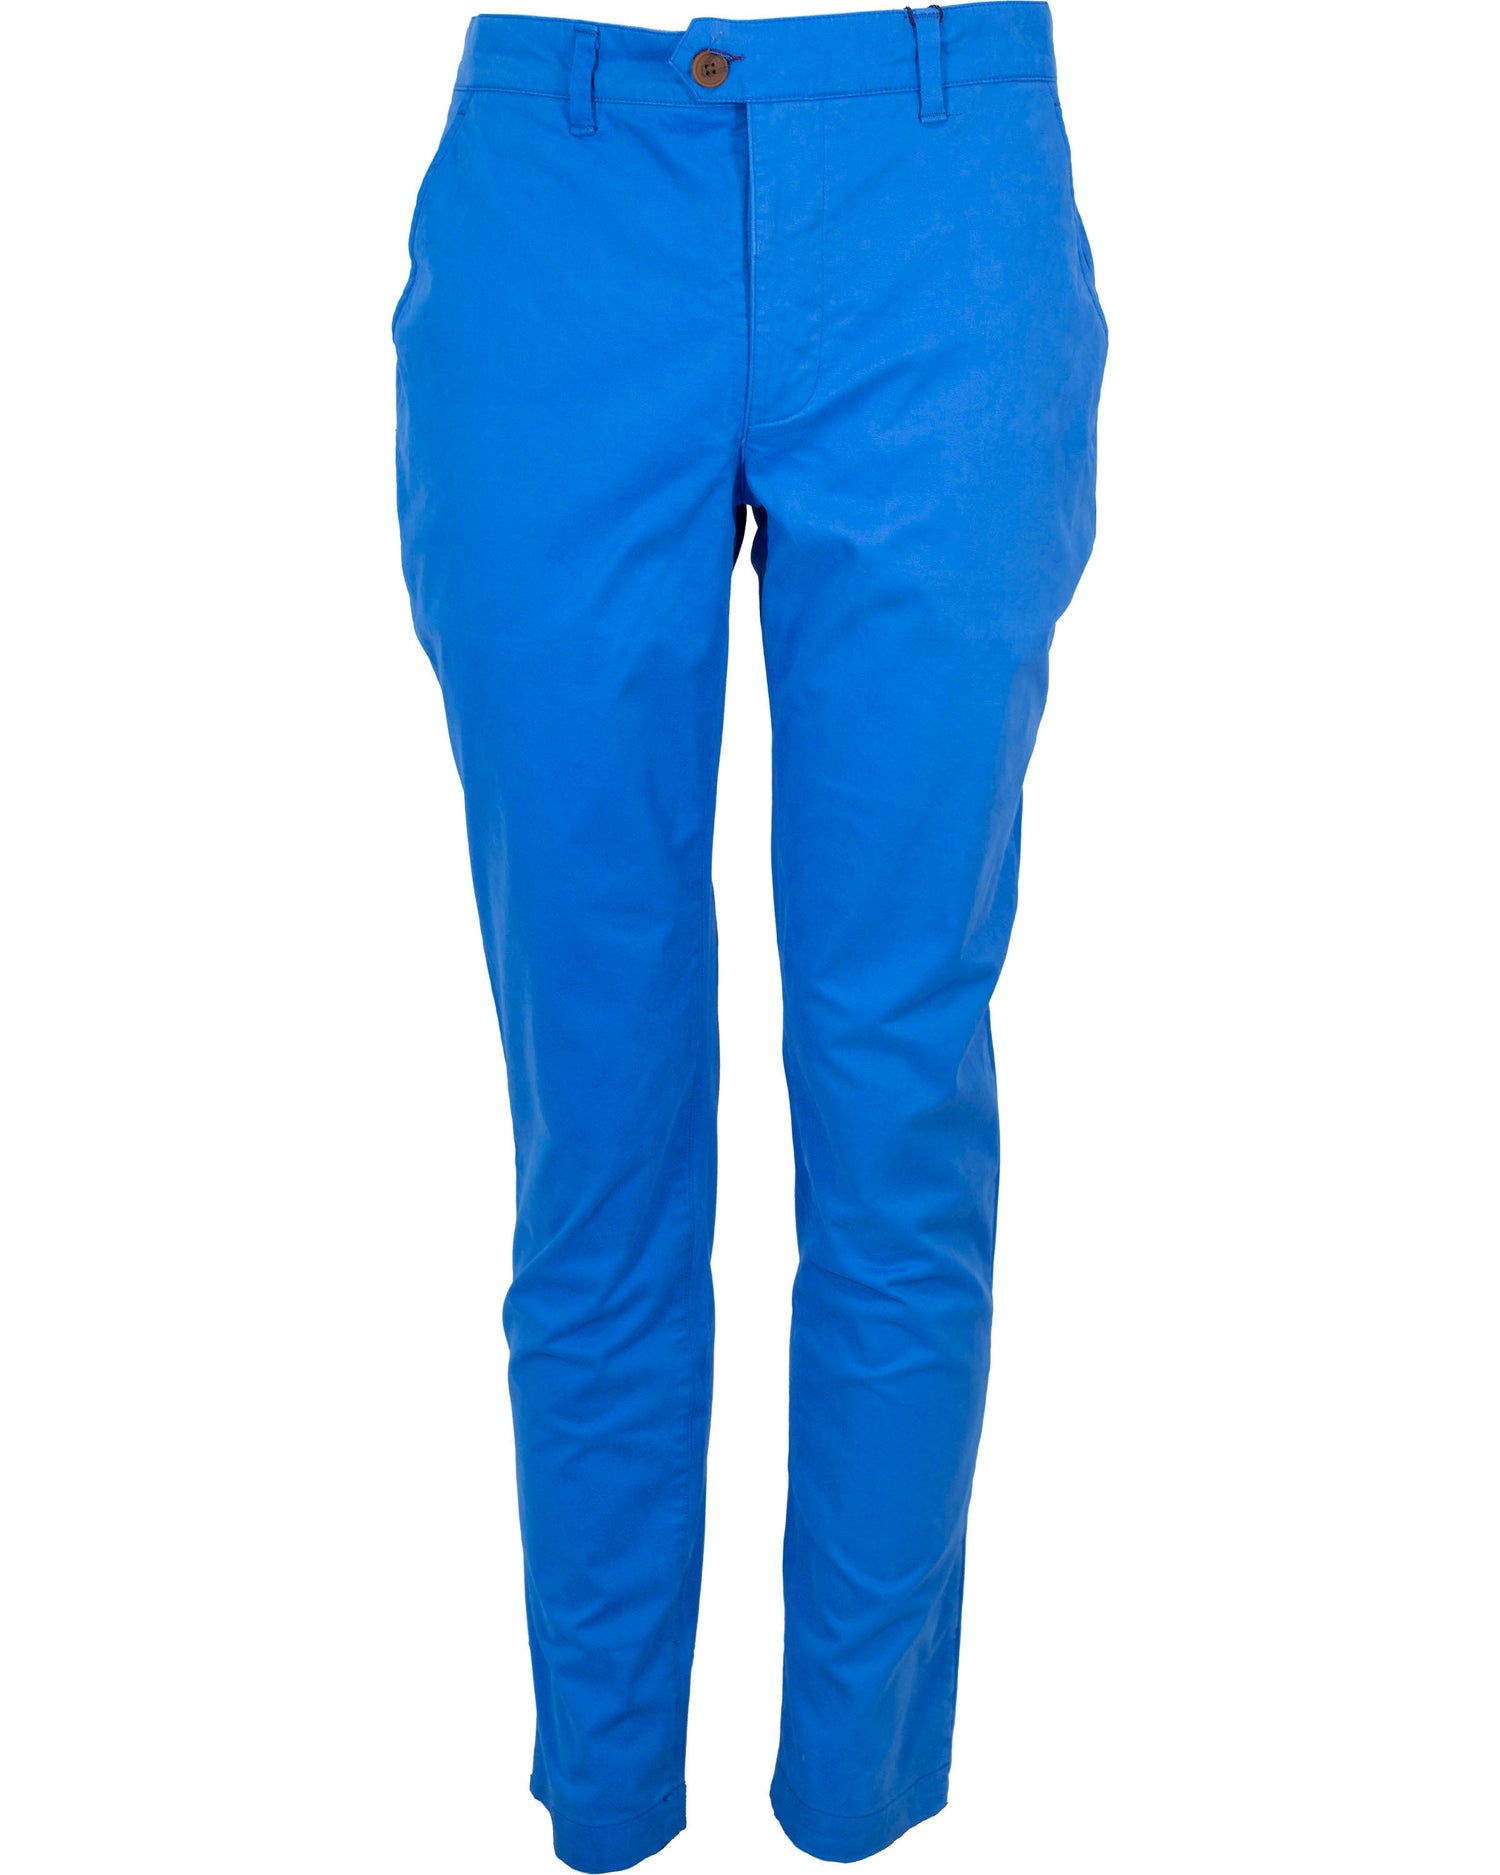 JACK LUX PANTS IN NEBULAS BLUE – Lords Of Harlech